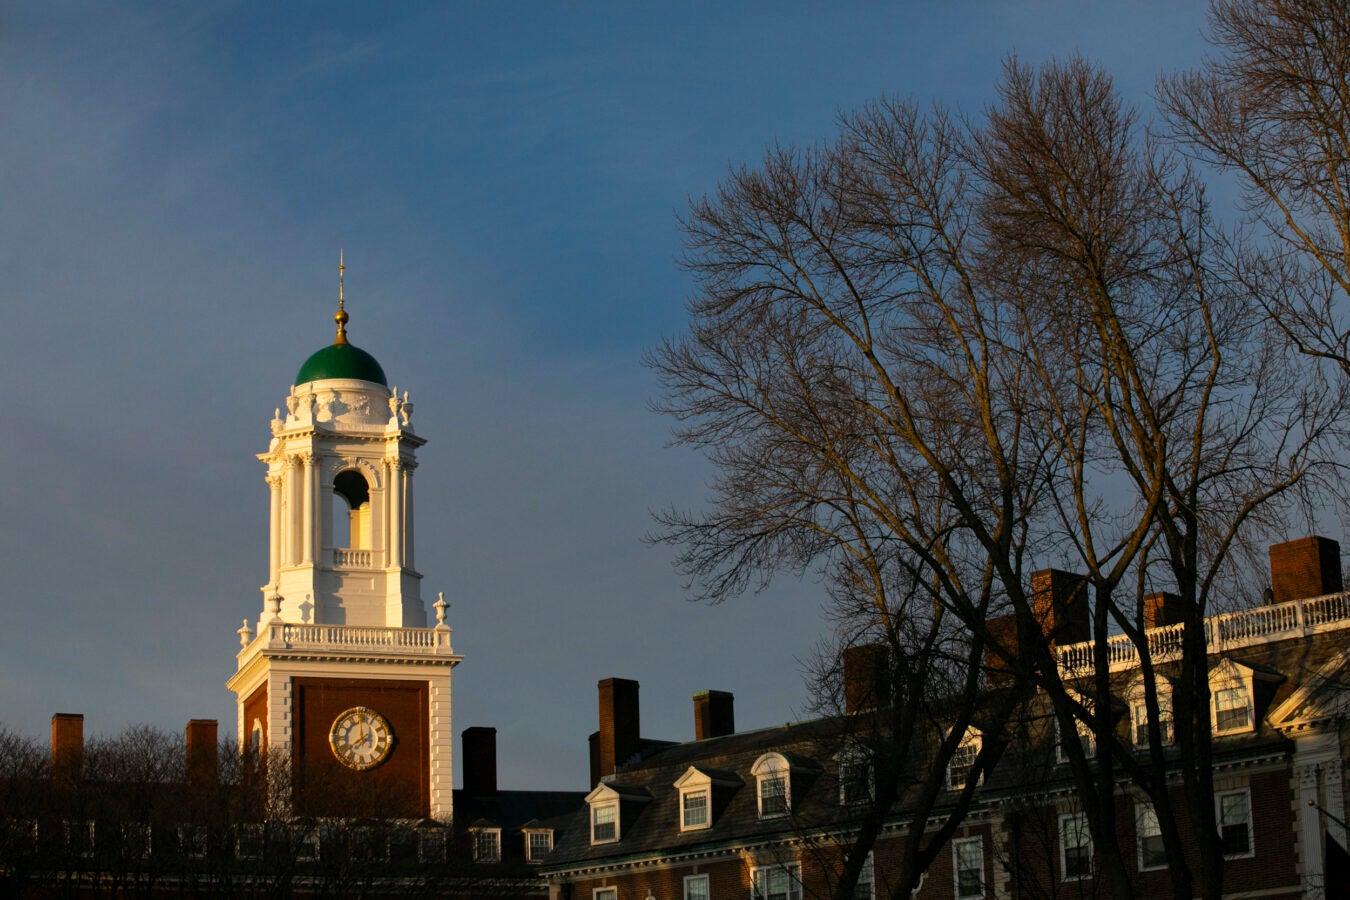 The cupola with green dome of Eliot House is pictured.